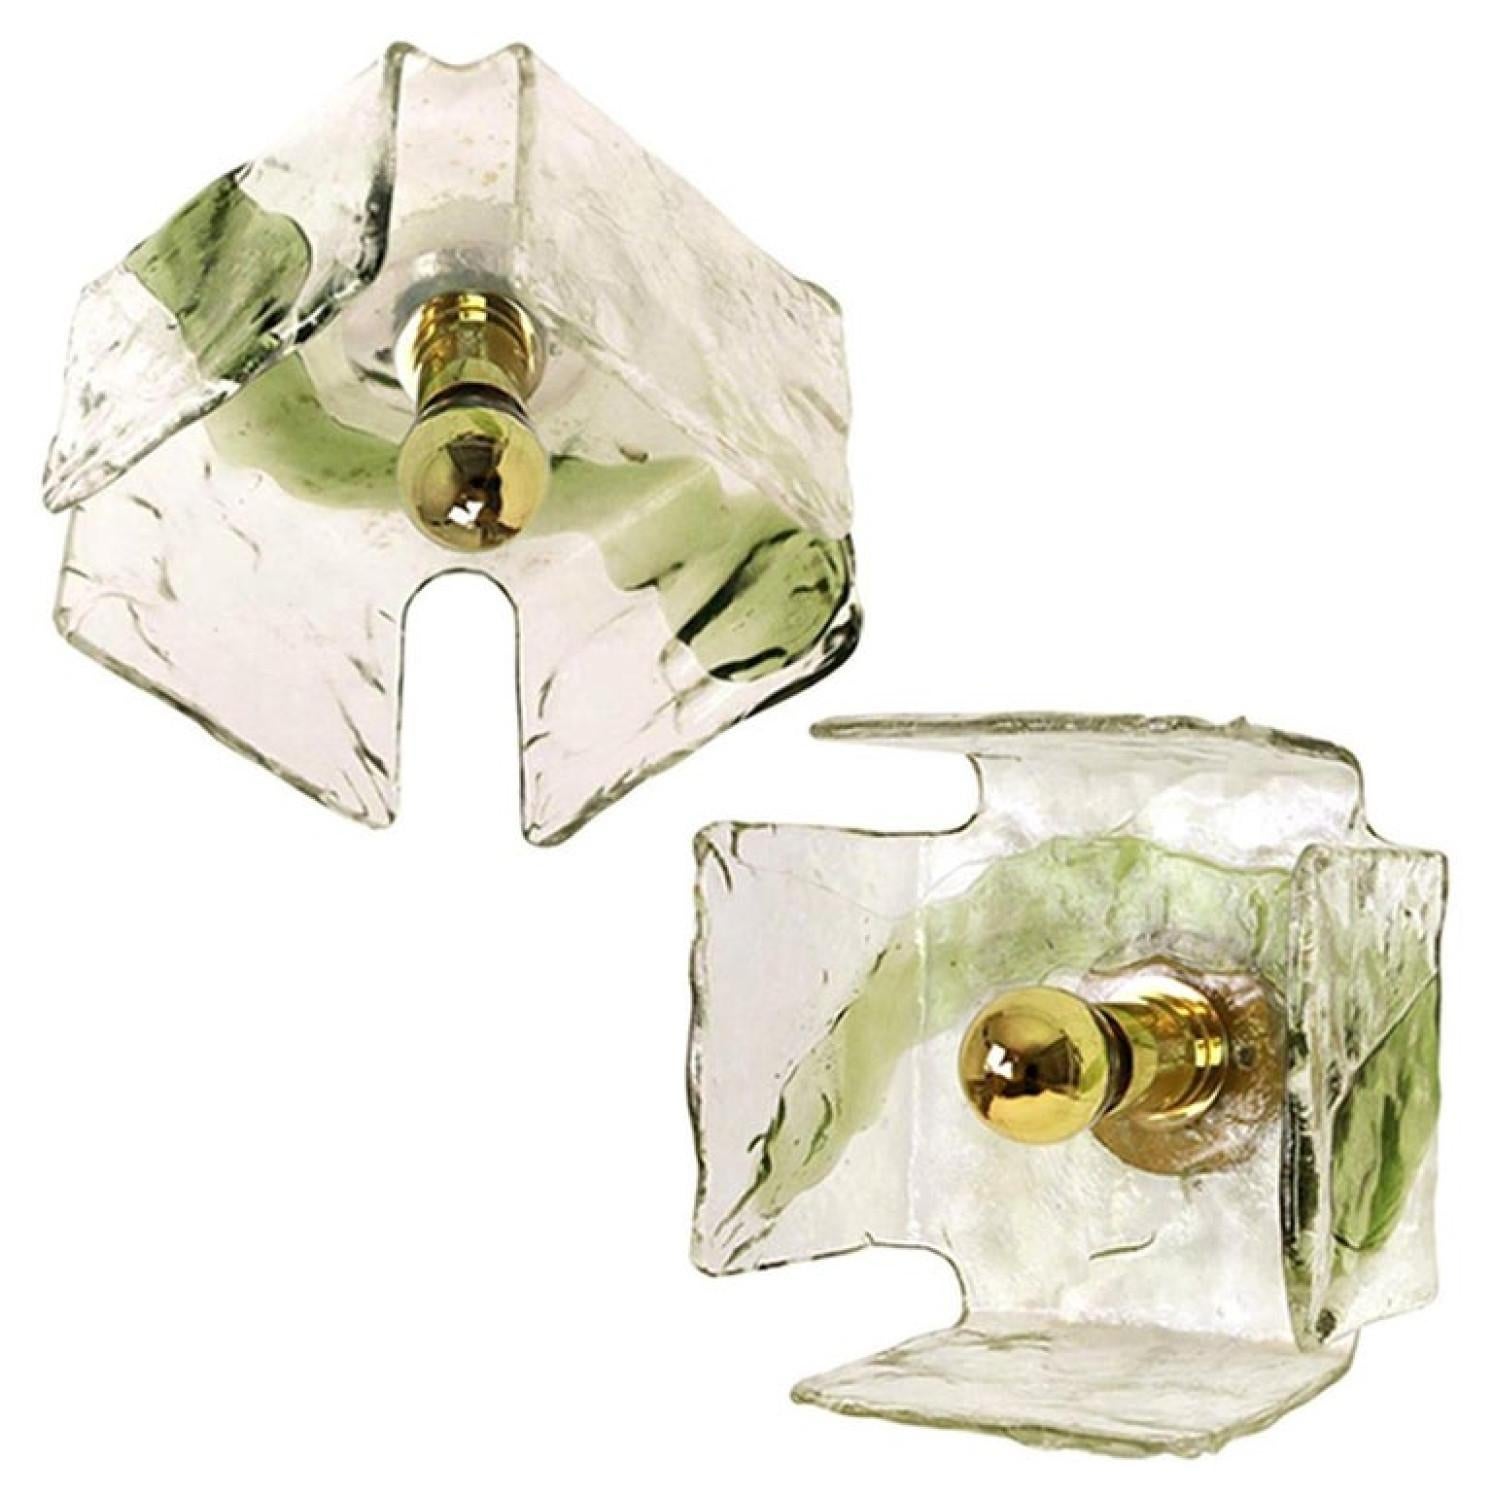 This glass wall sconces or ceiling lights executed in hand blown green and clear Murano glass and chrome hardware are produced by J.T. Kalmar, Austria, in the 1960s. Illuminates beautifully.

Please notice the price is per item. We have more pieces